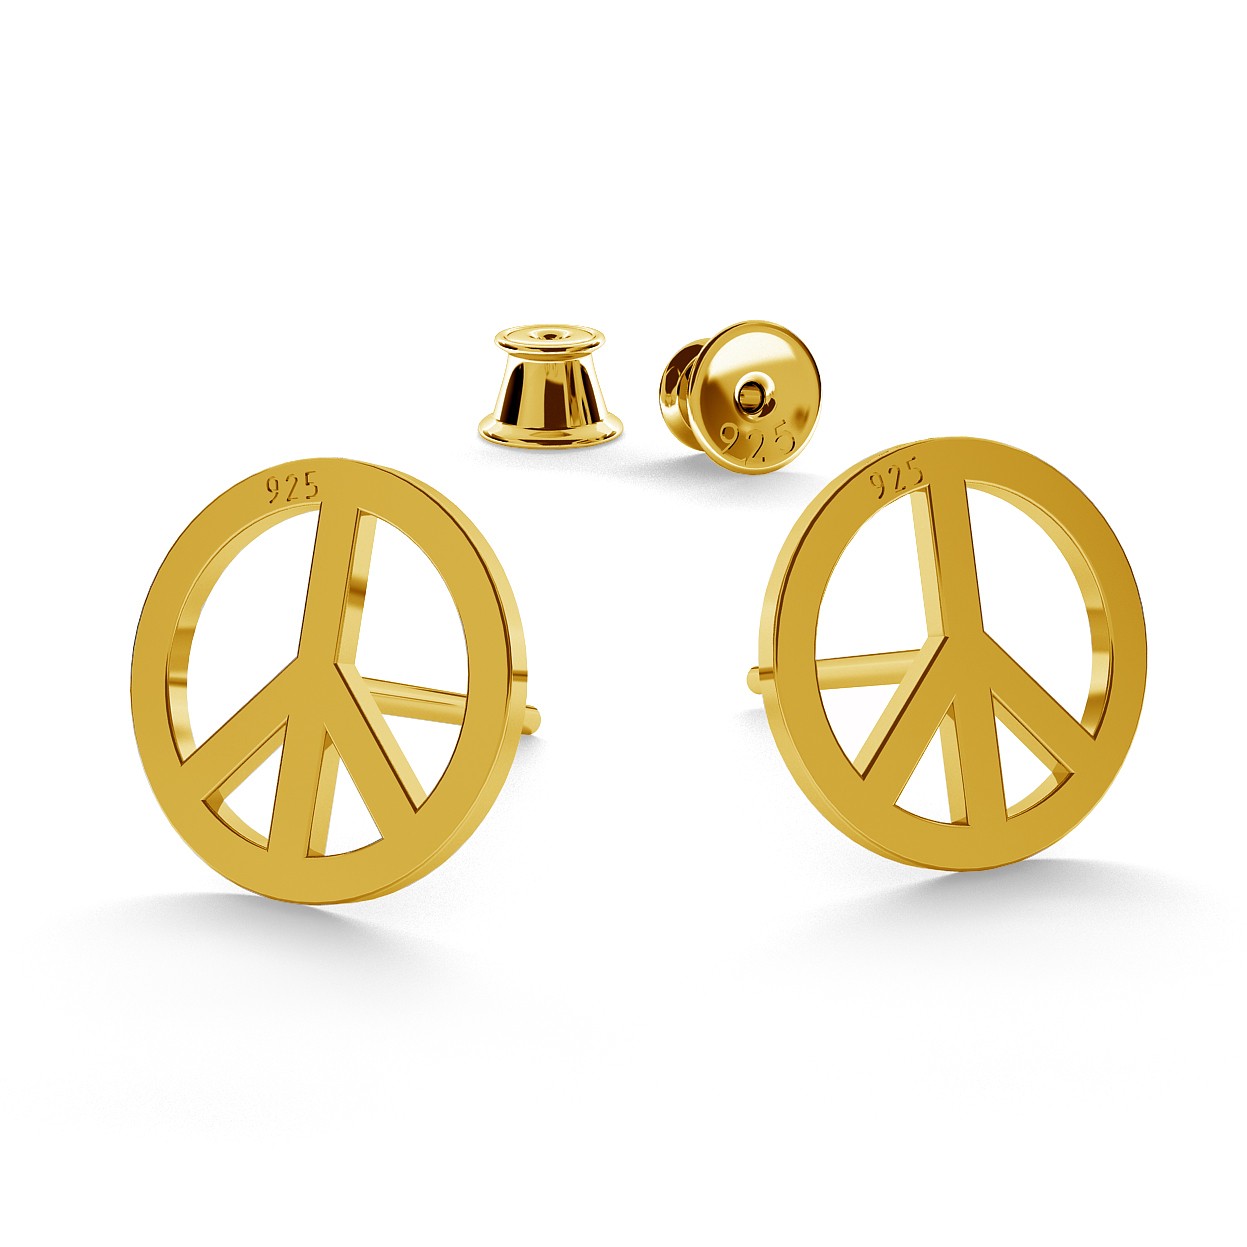 PEACE SYMBOL EARRINGS, STERLING SILVER (925) RHODIUM OR GOLD PLATED